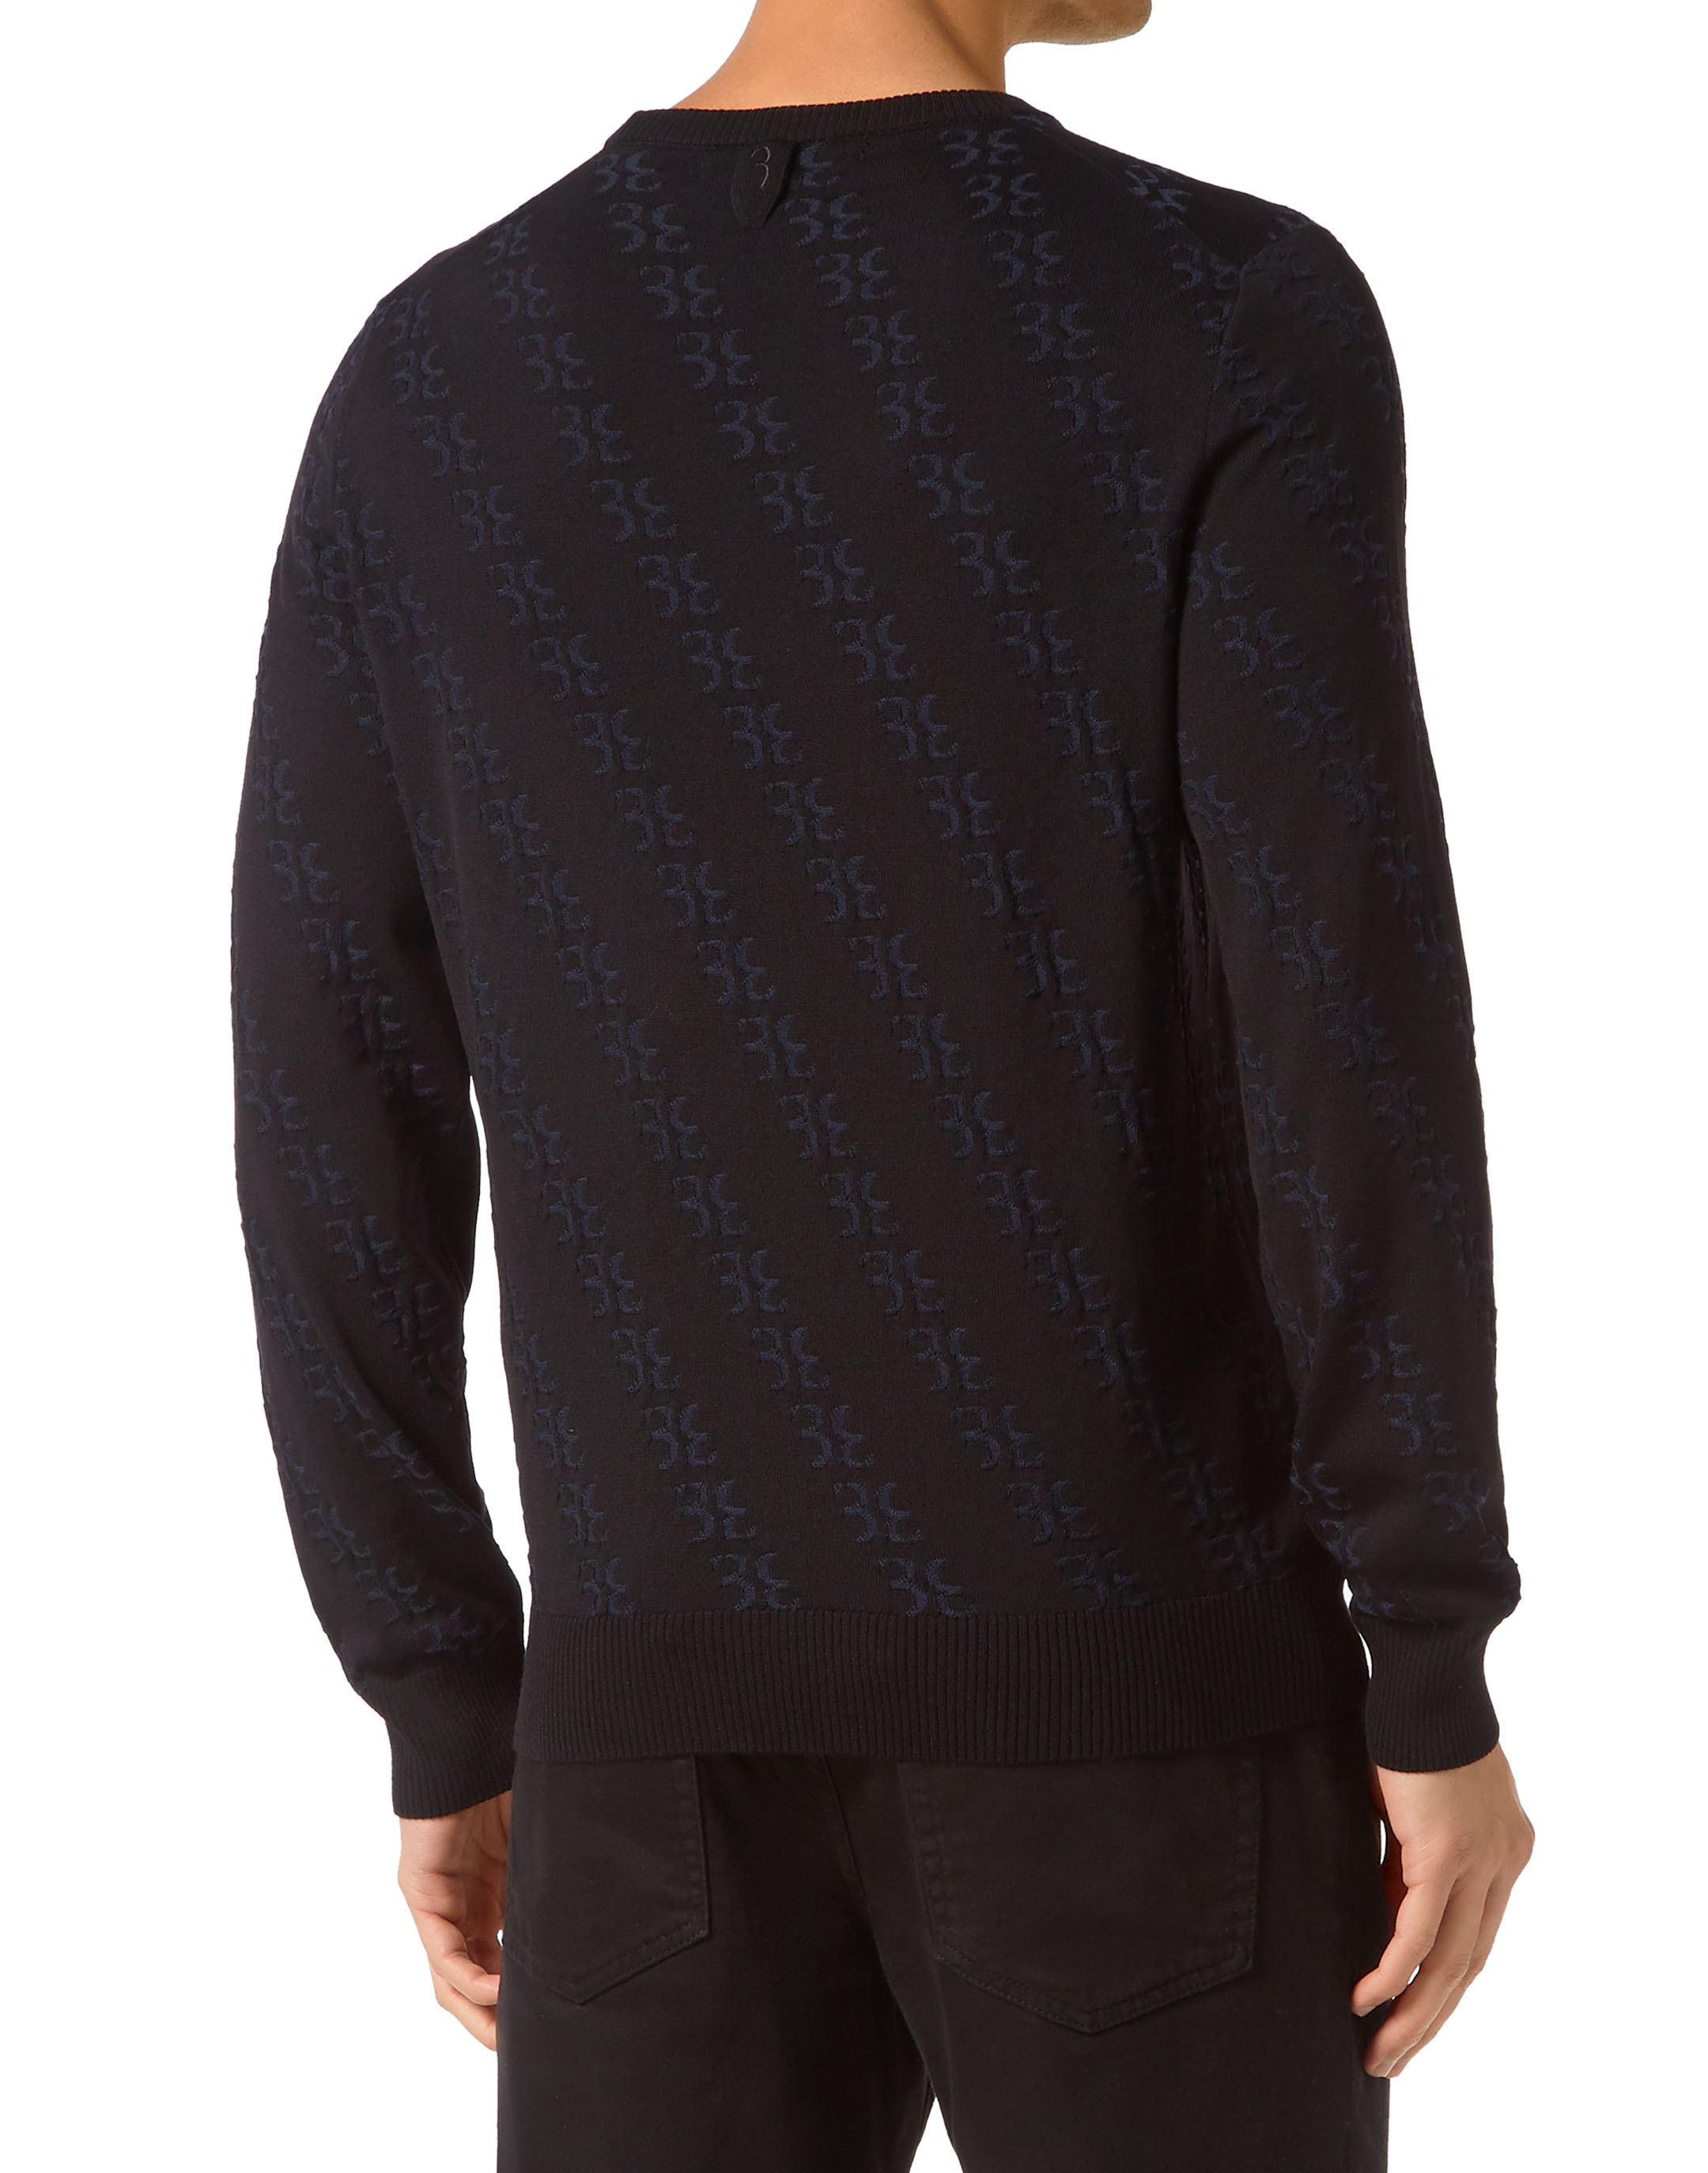 Wool and Silk Pullover Round Neck LS Billionaire, Clothing